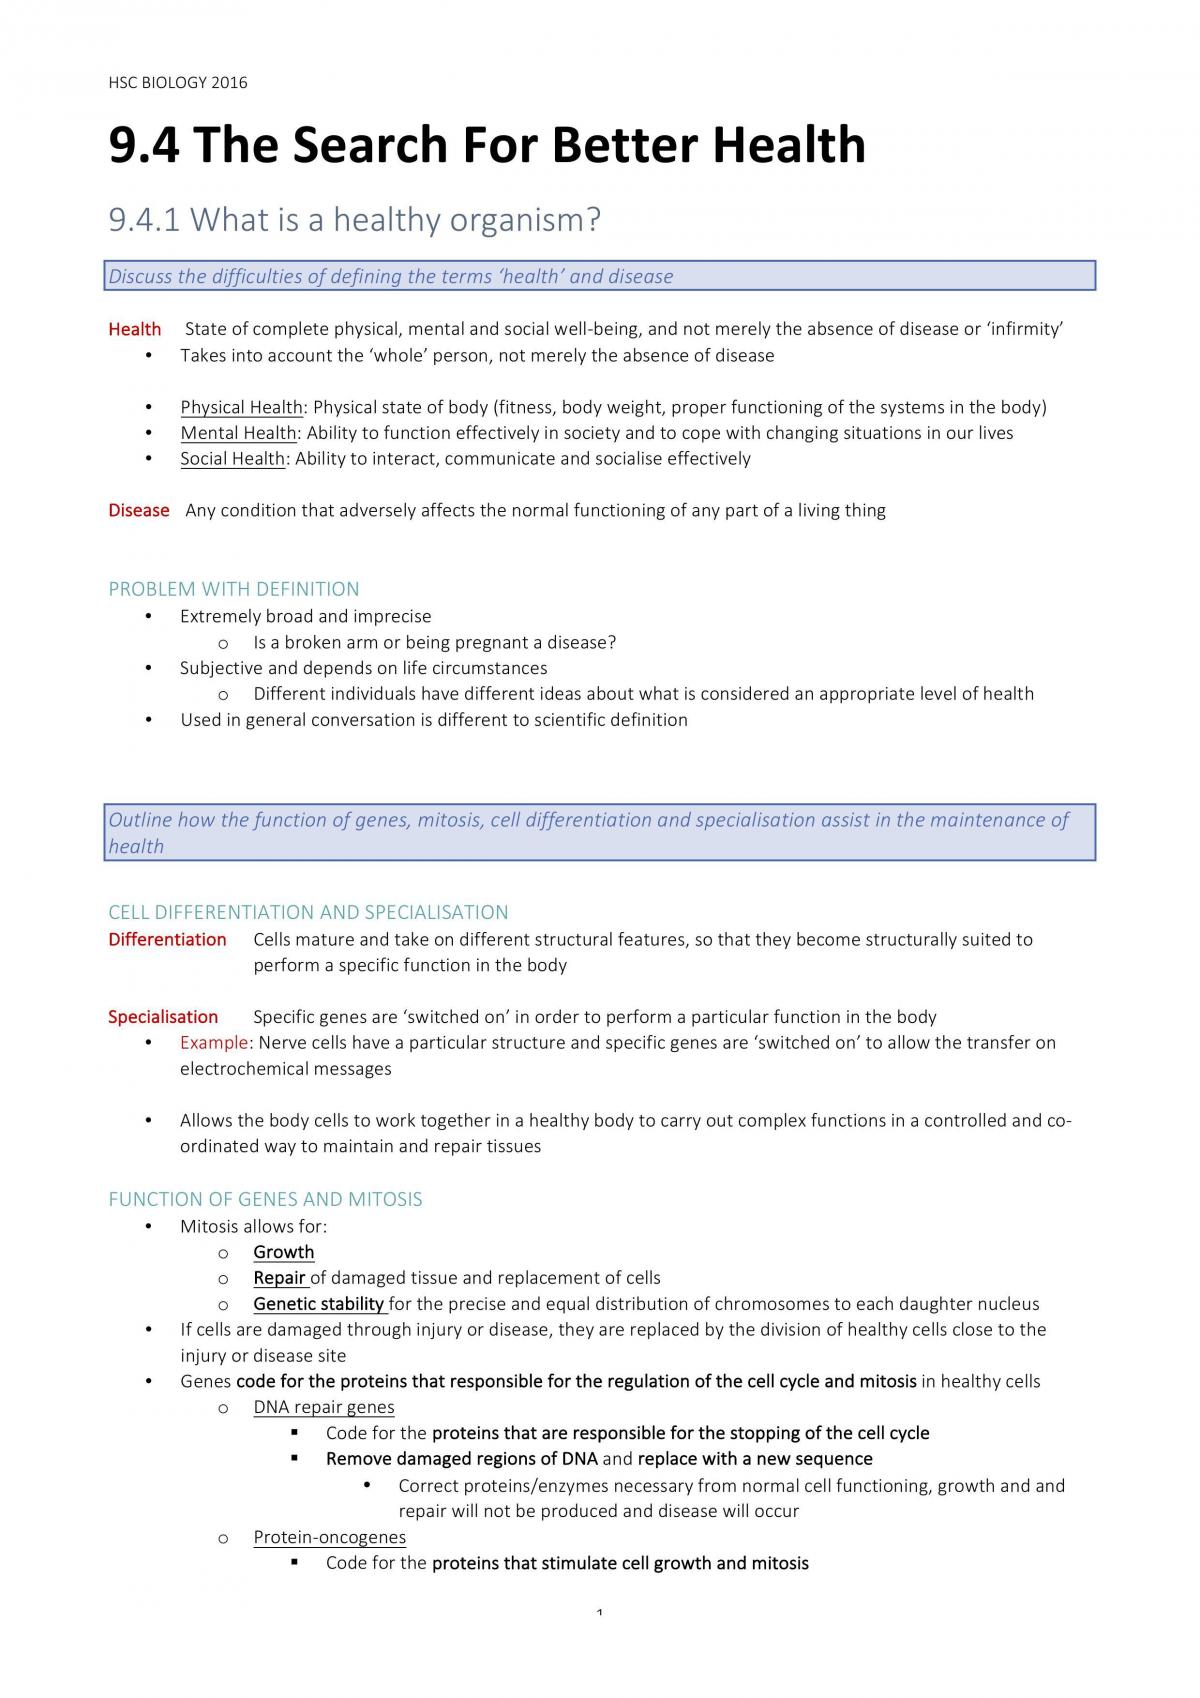 Search For Better Health Complete Notes - Page 1